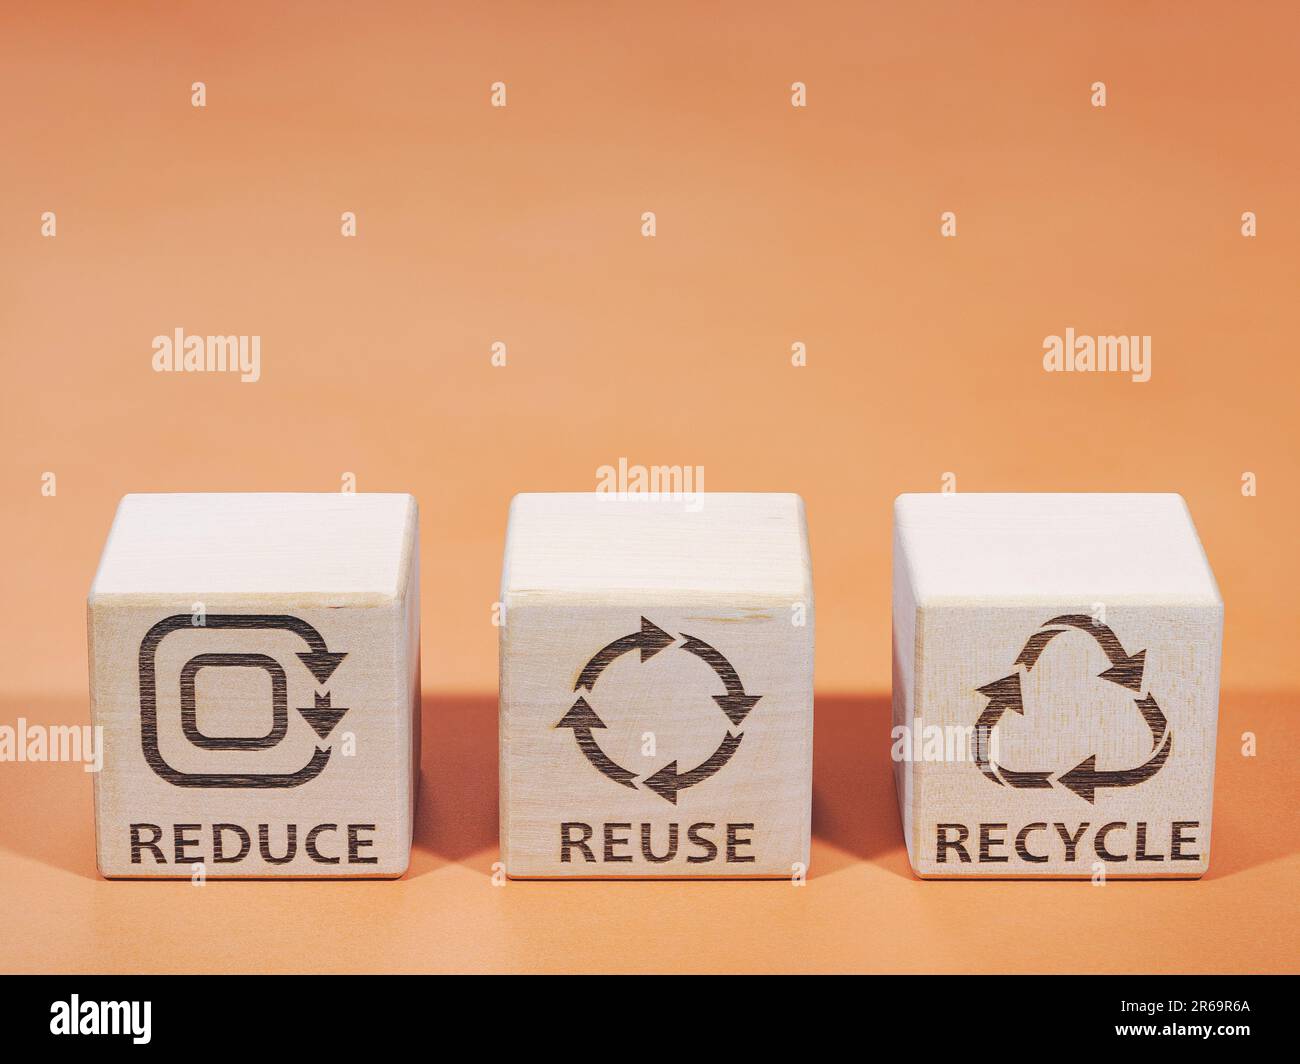 Reduce, Reuse, and Recycle symbols as concept of resources consumption Stock Photo